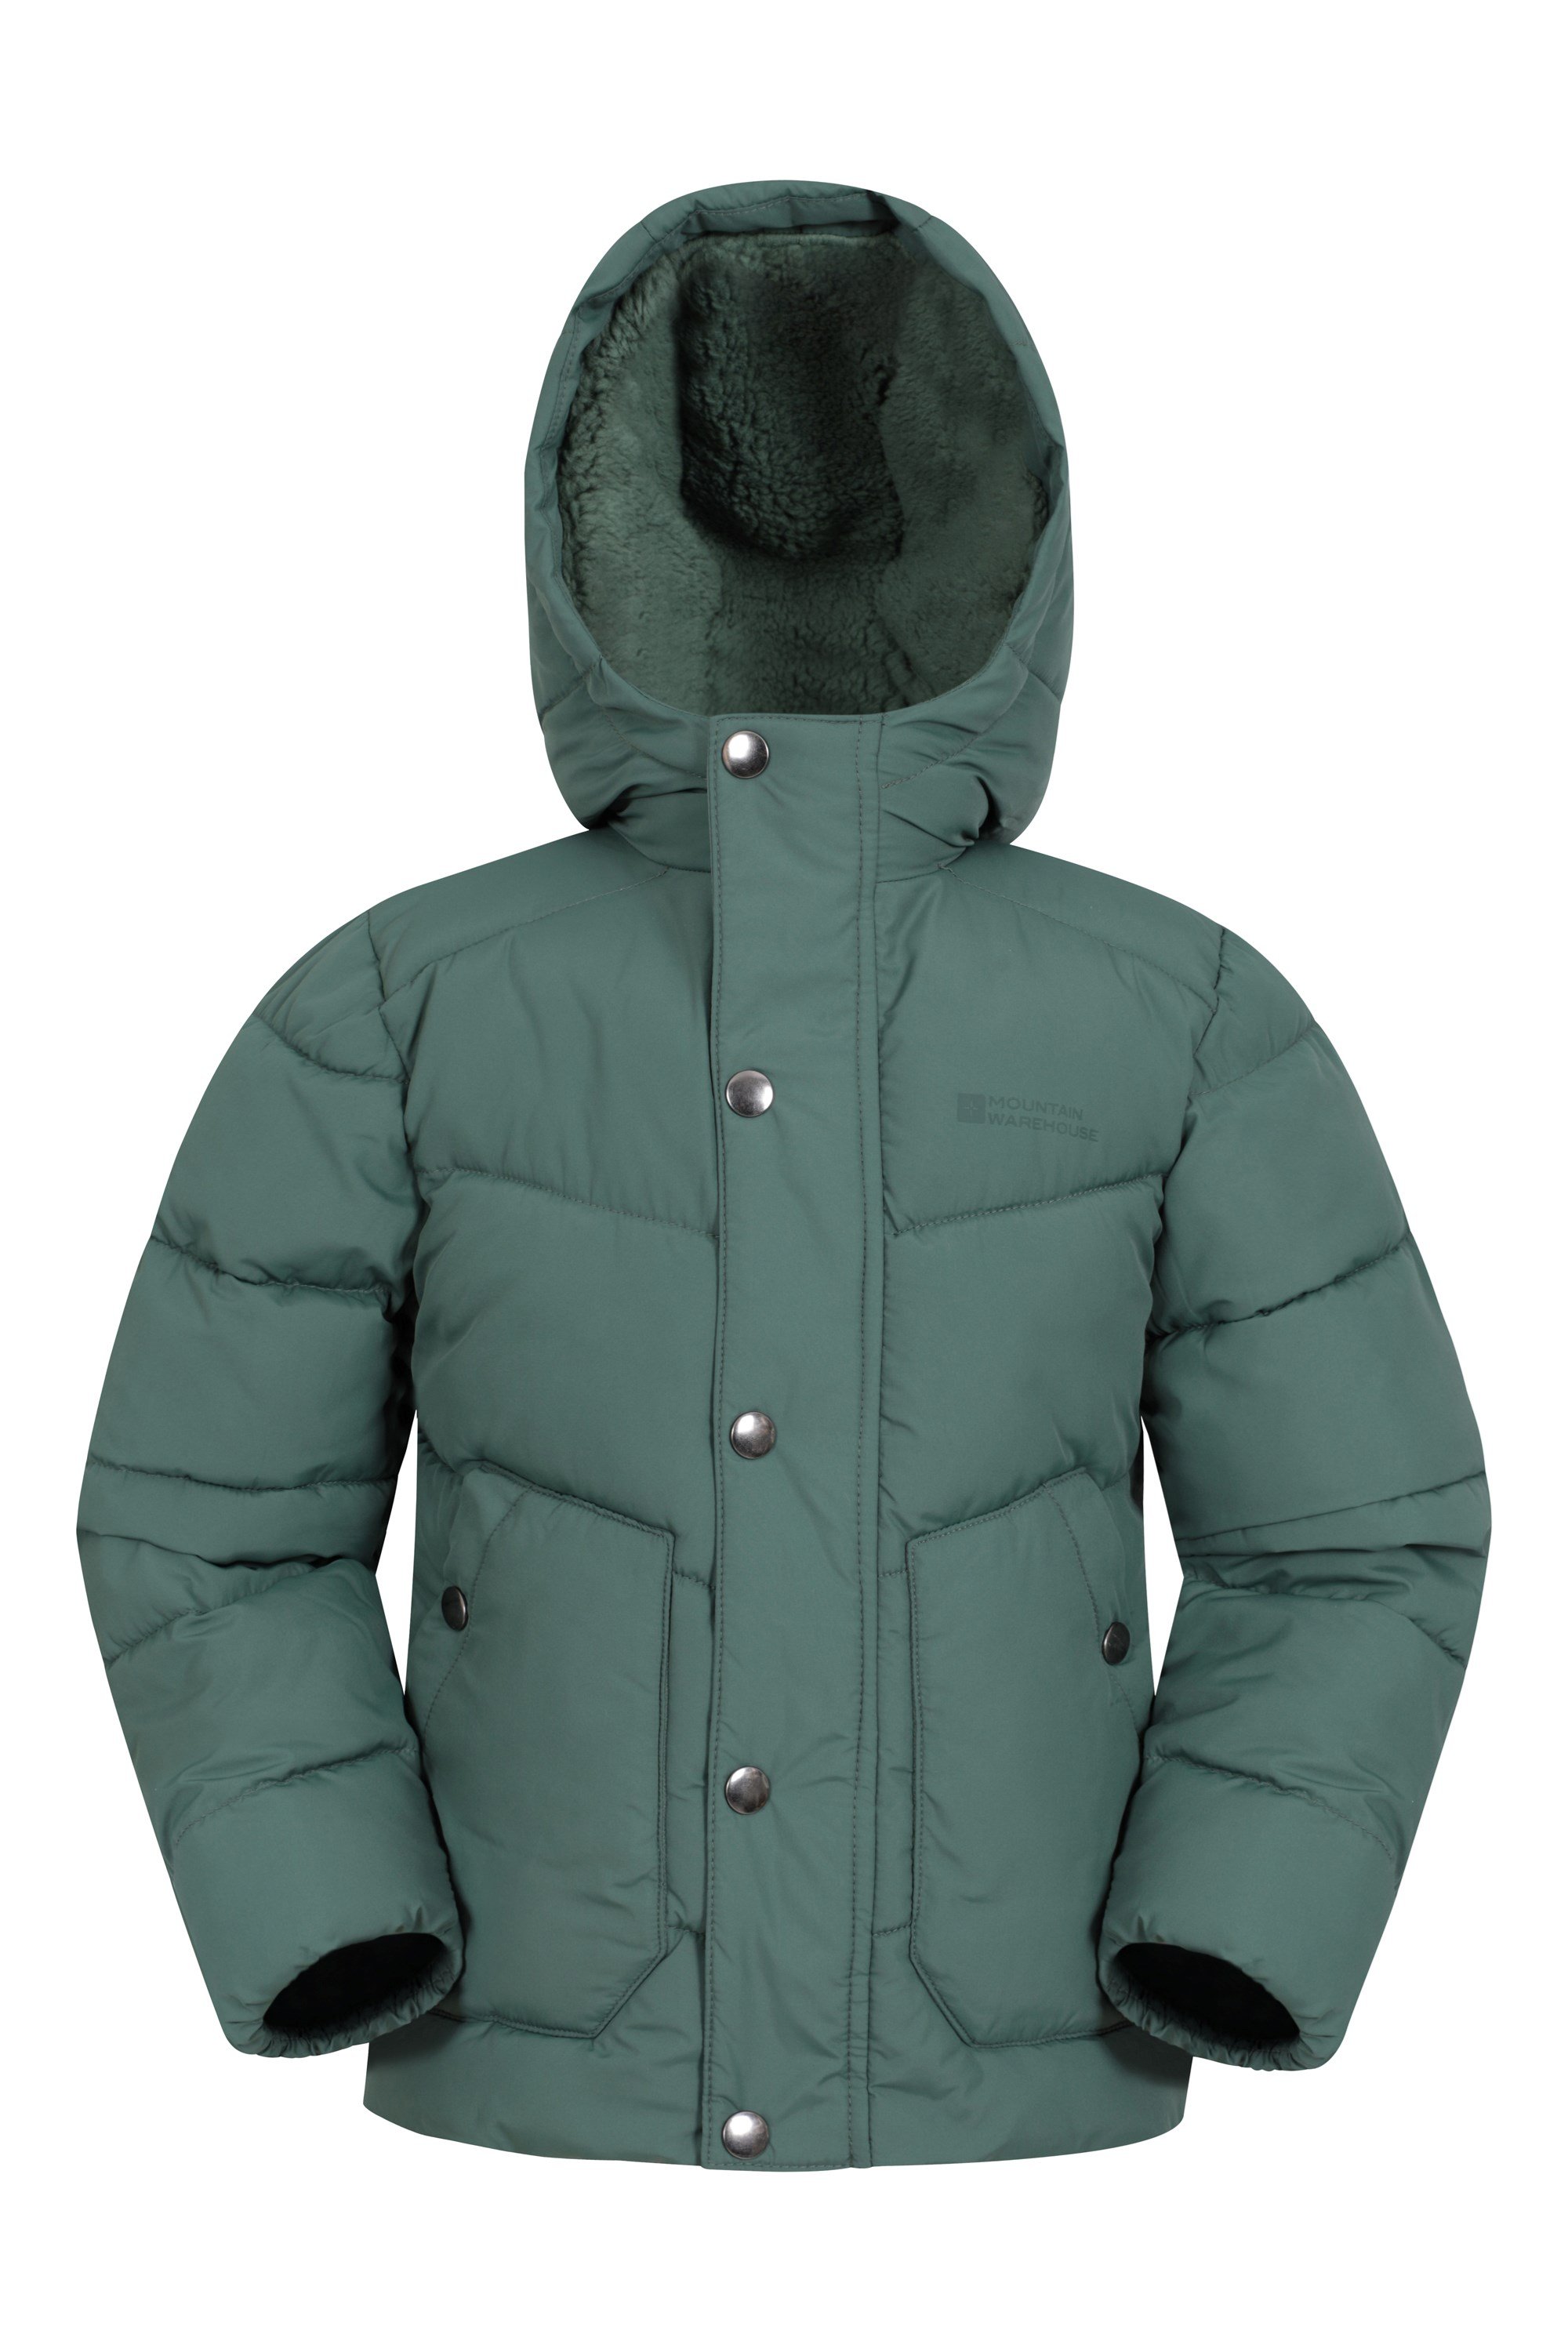 Link Borg Lined Kids Padded Jacket - Green